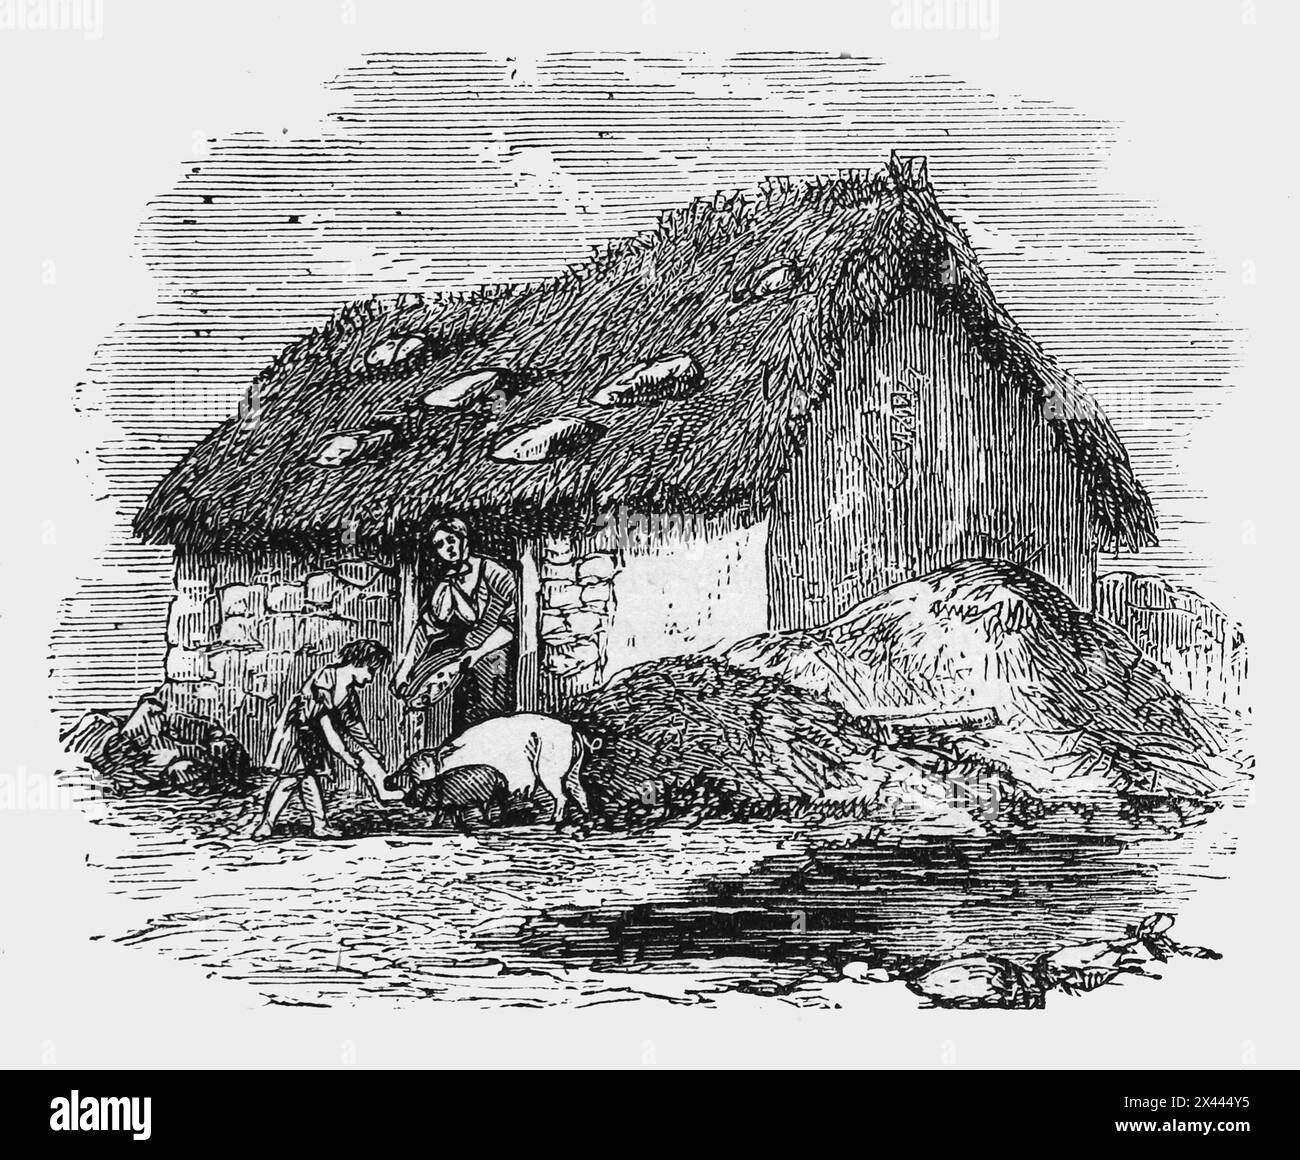 A Hovel in the far West of Ireland 19th Century; Illustration from Cassell's History of England, vol VII. New Edition pubblicato Circ 1873-5. Foto Stock